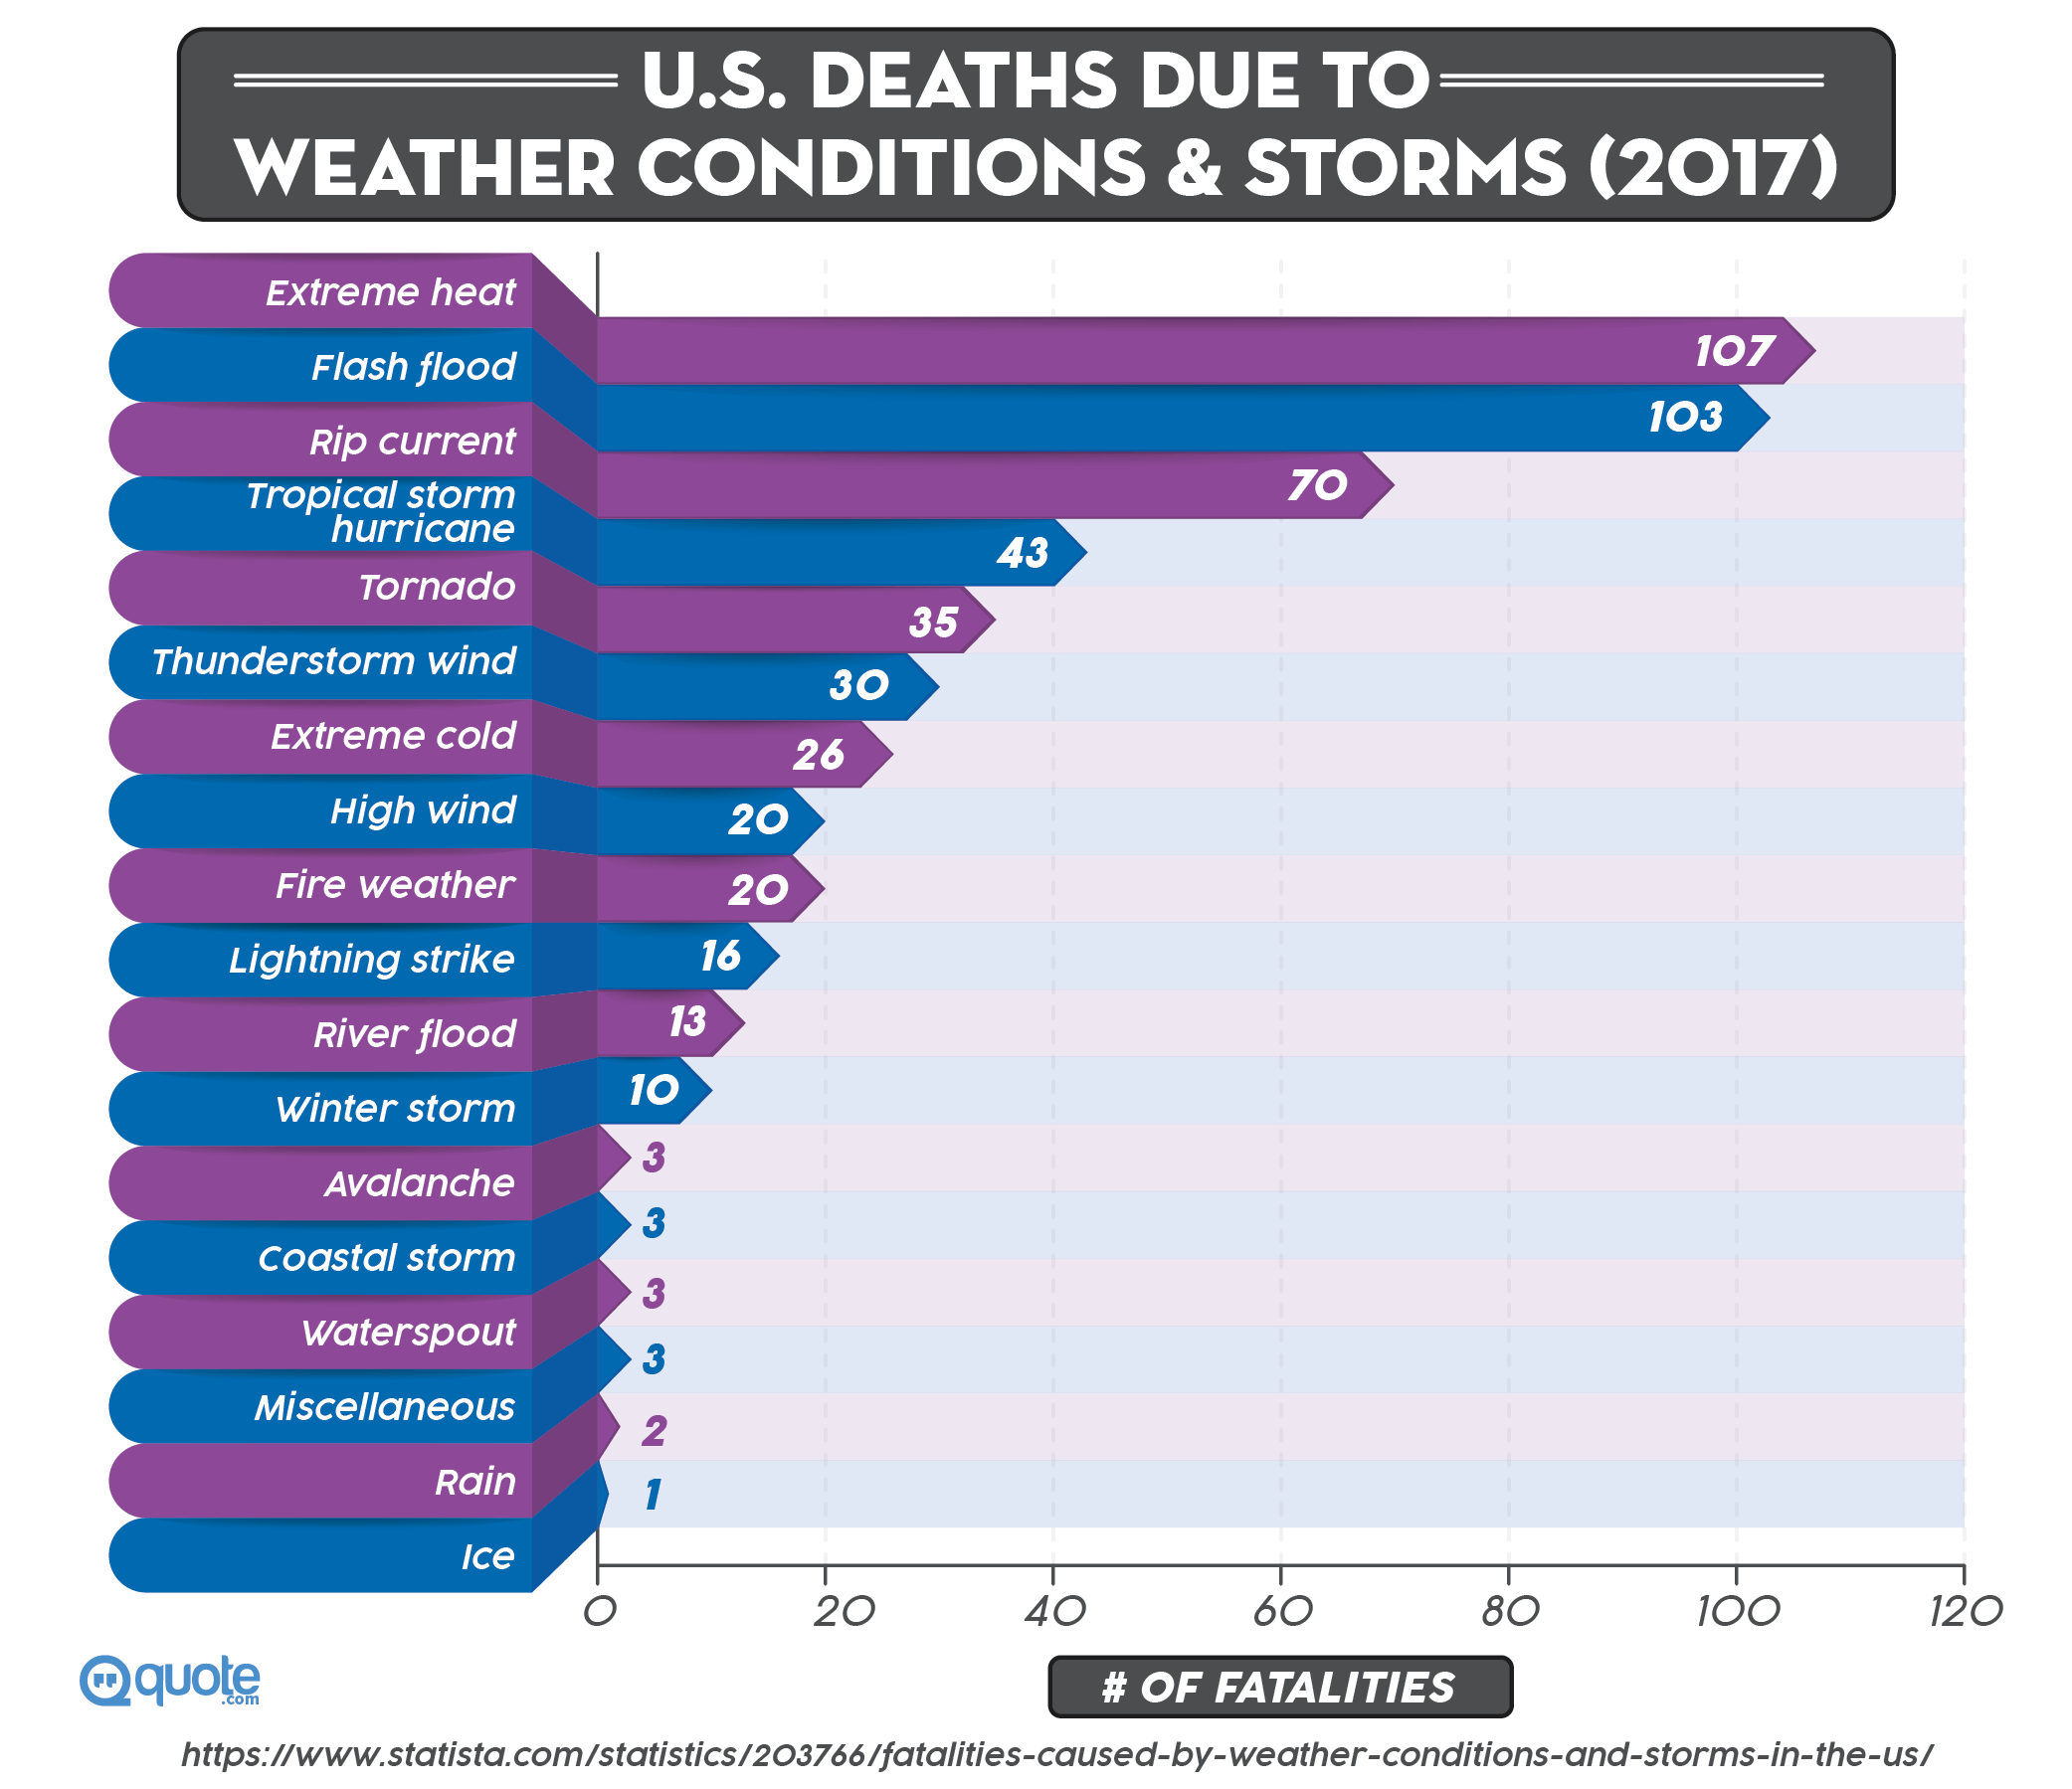 U.S. Deaths Due To Weather Conditions & Storms